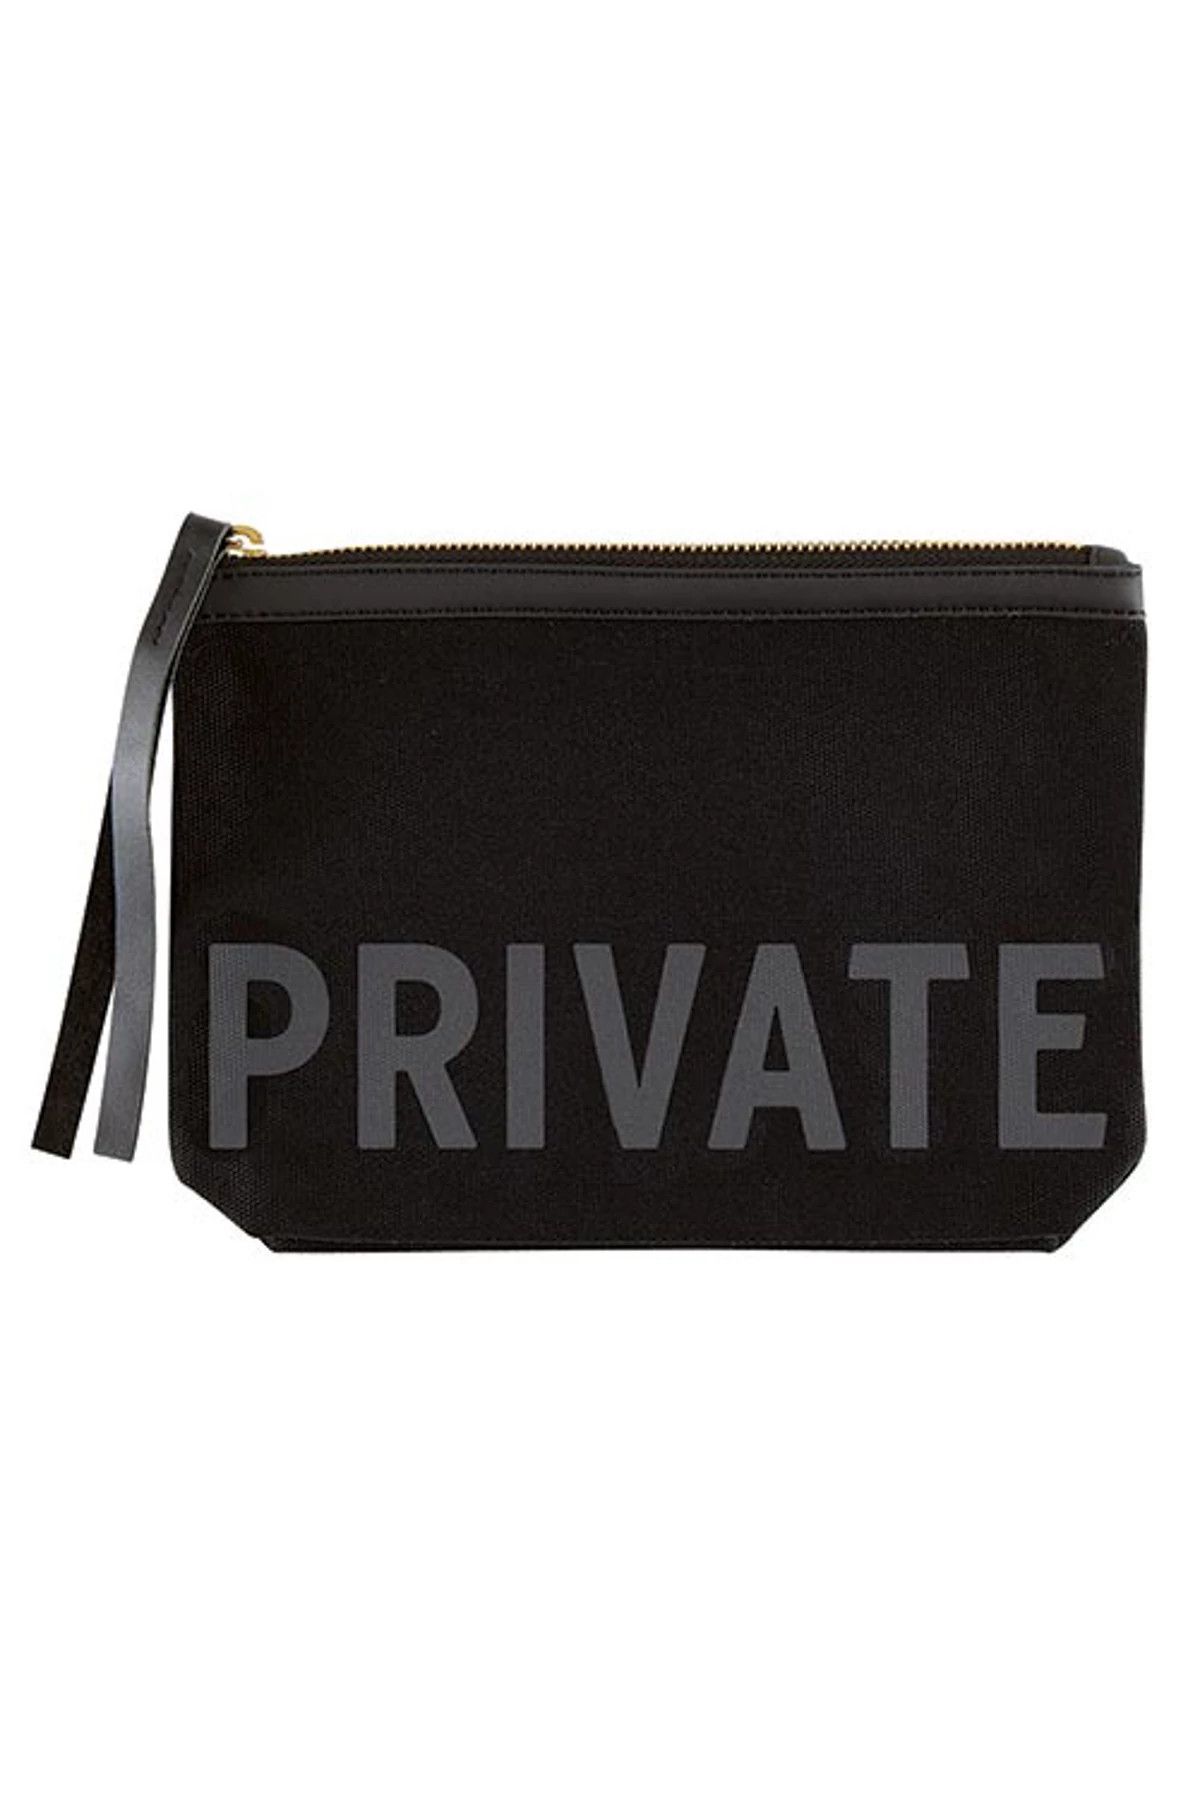 Private Pouch | Everything But Water